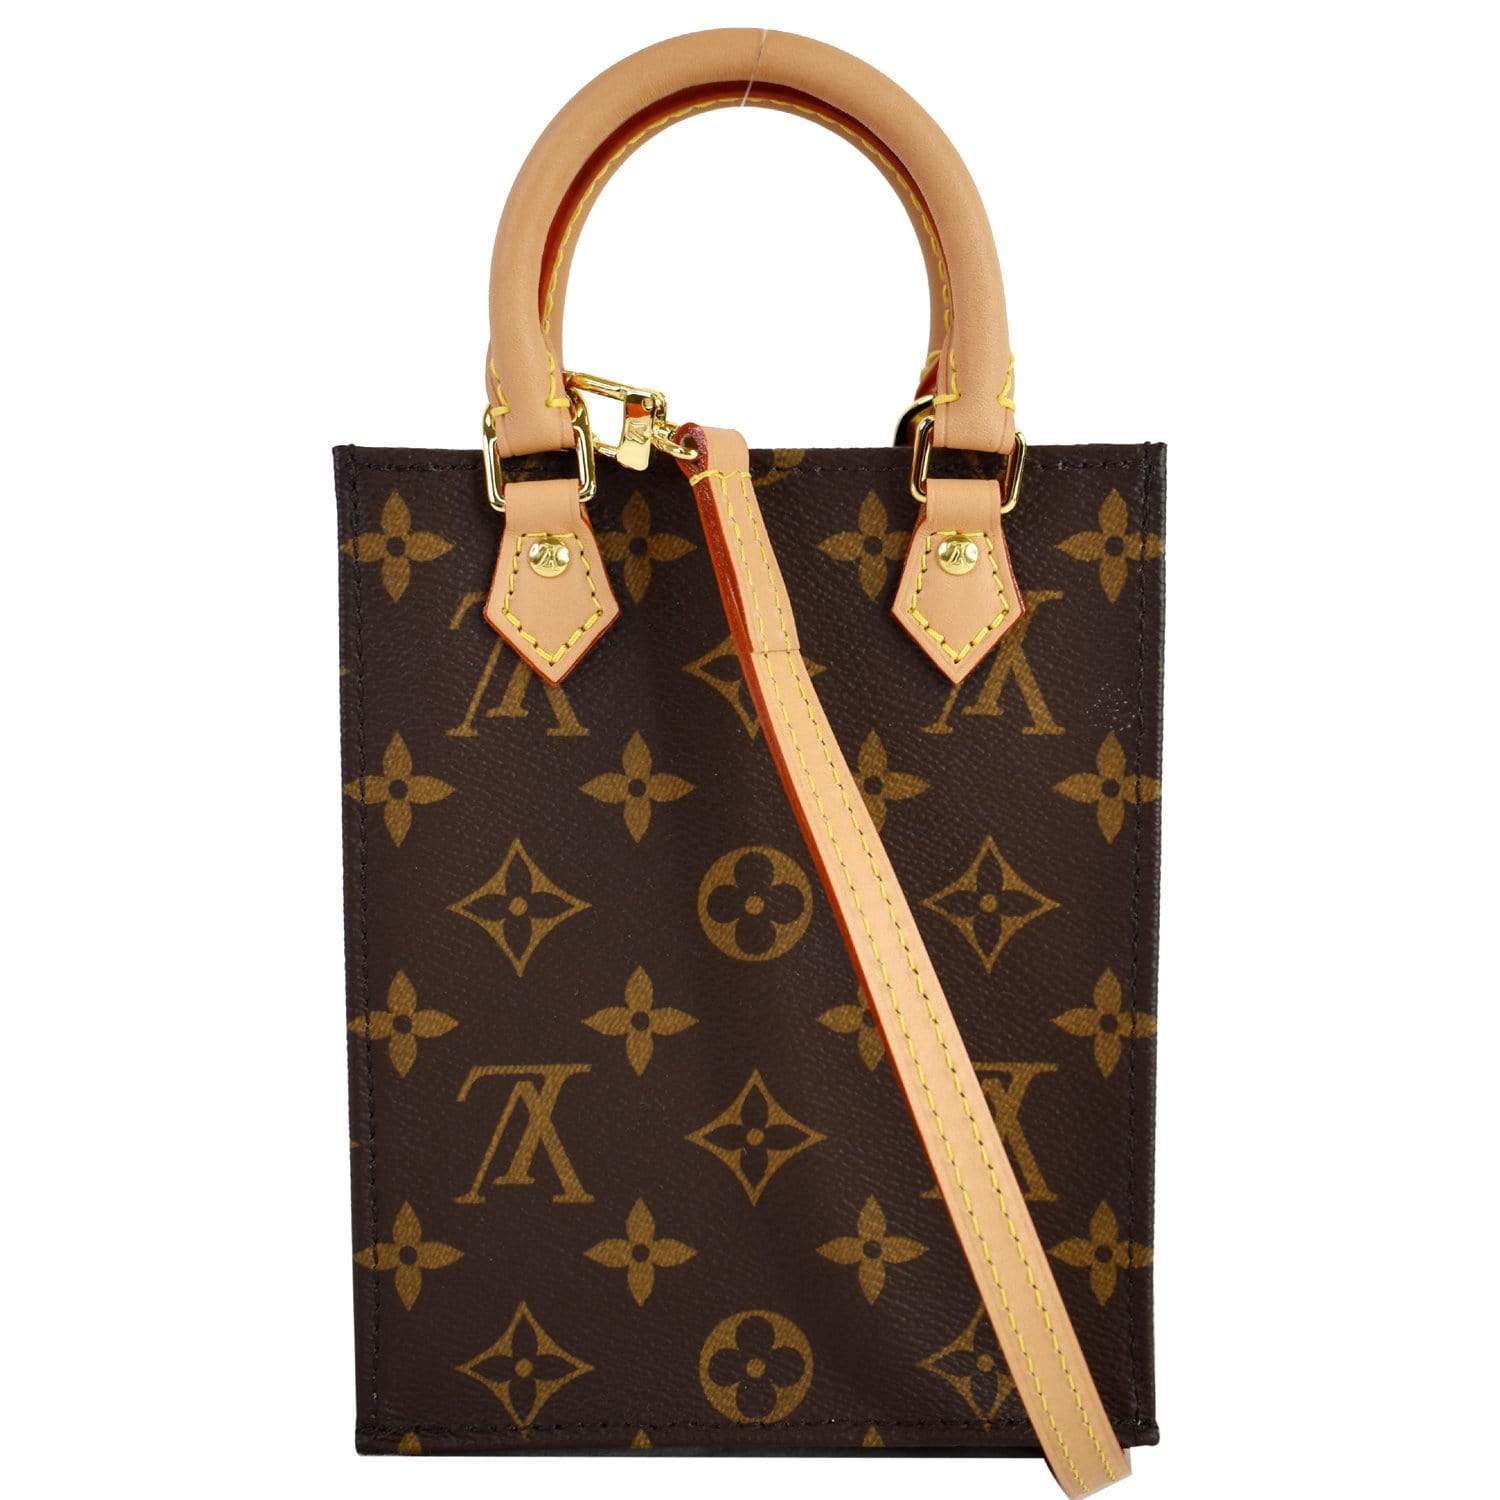 1 YEAR WEAR AND TEAR/REVIEW OF THE LOUIS VUITTON PETIT SAC PLAT IN MONOGRAM  CANVAS